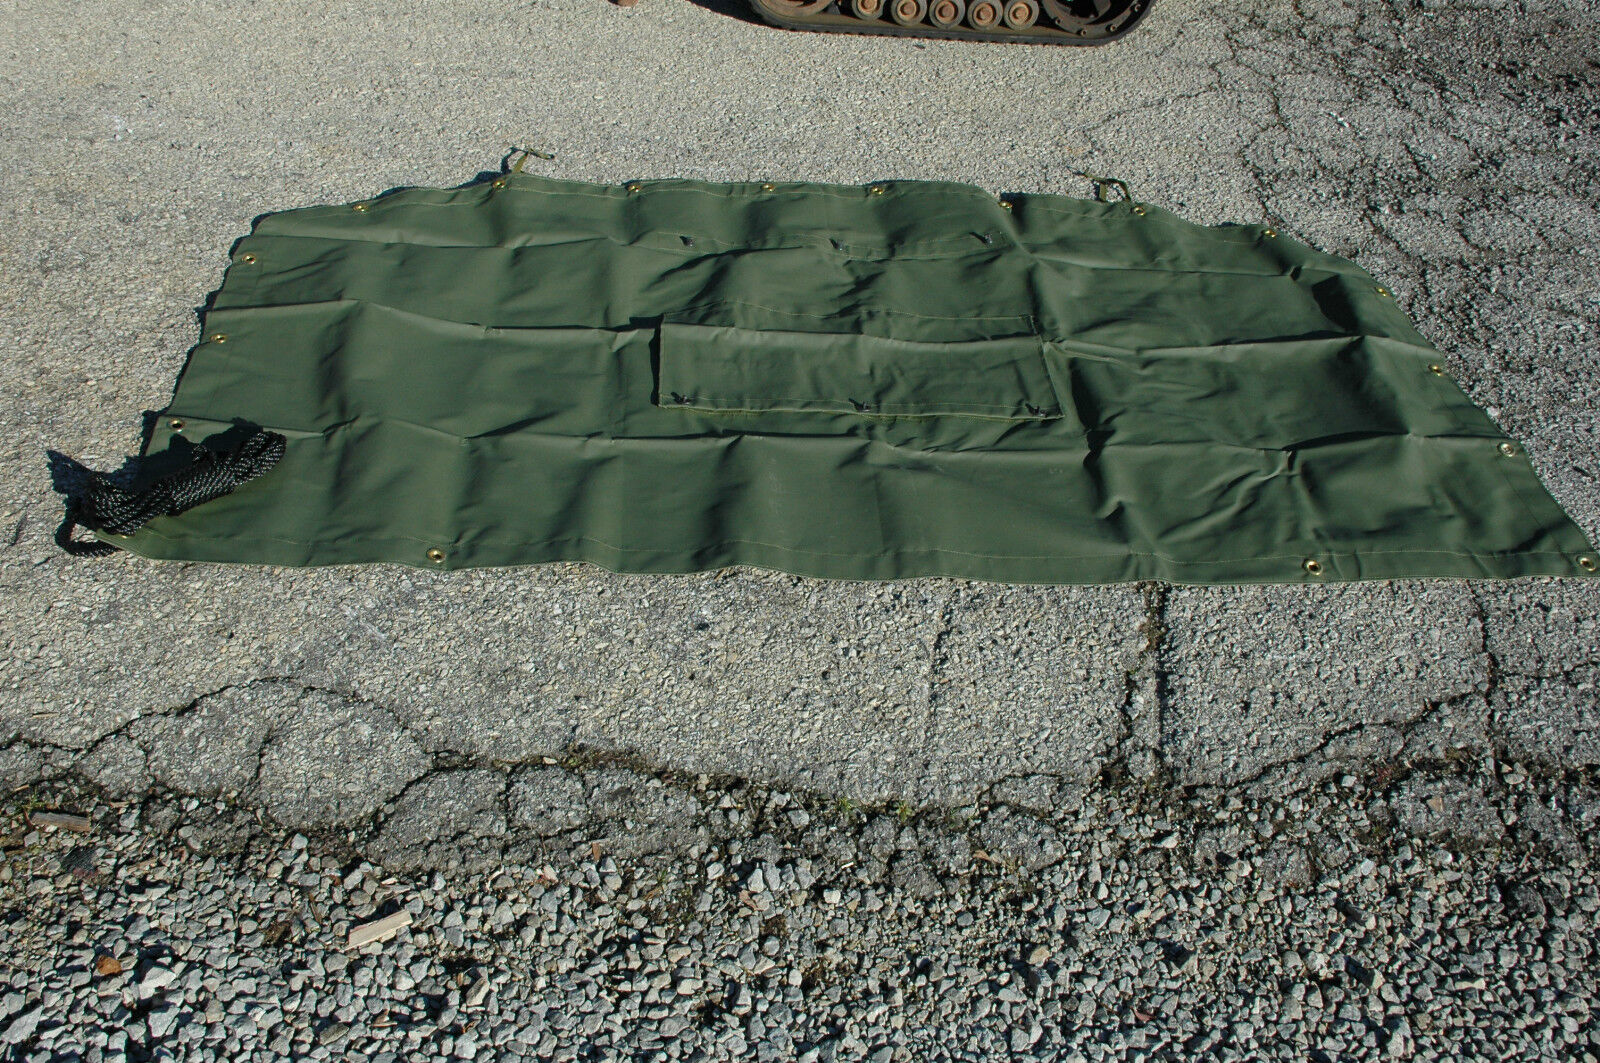 End Curtain, Cargo Cover M35, 2.5T, 2540-00-741-6339